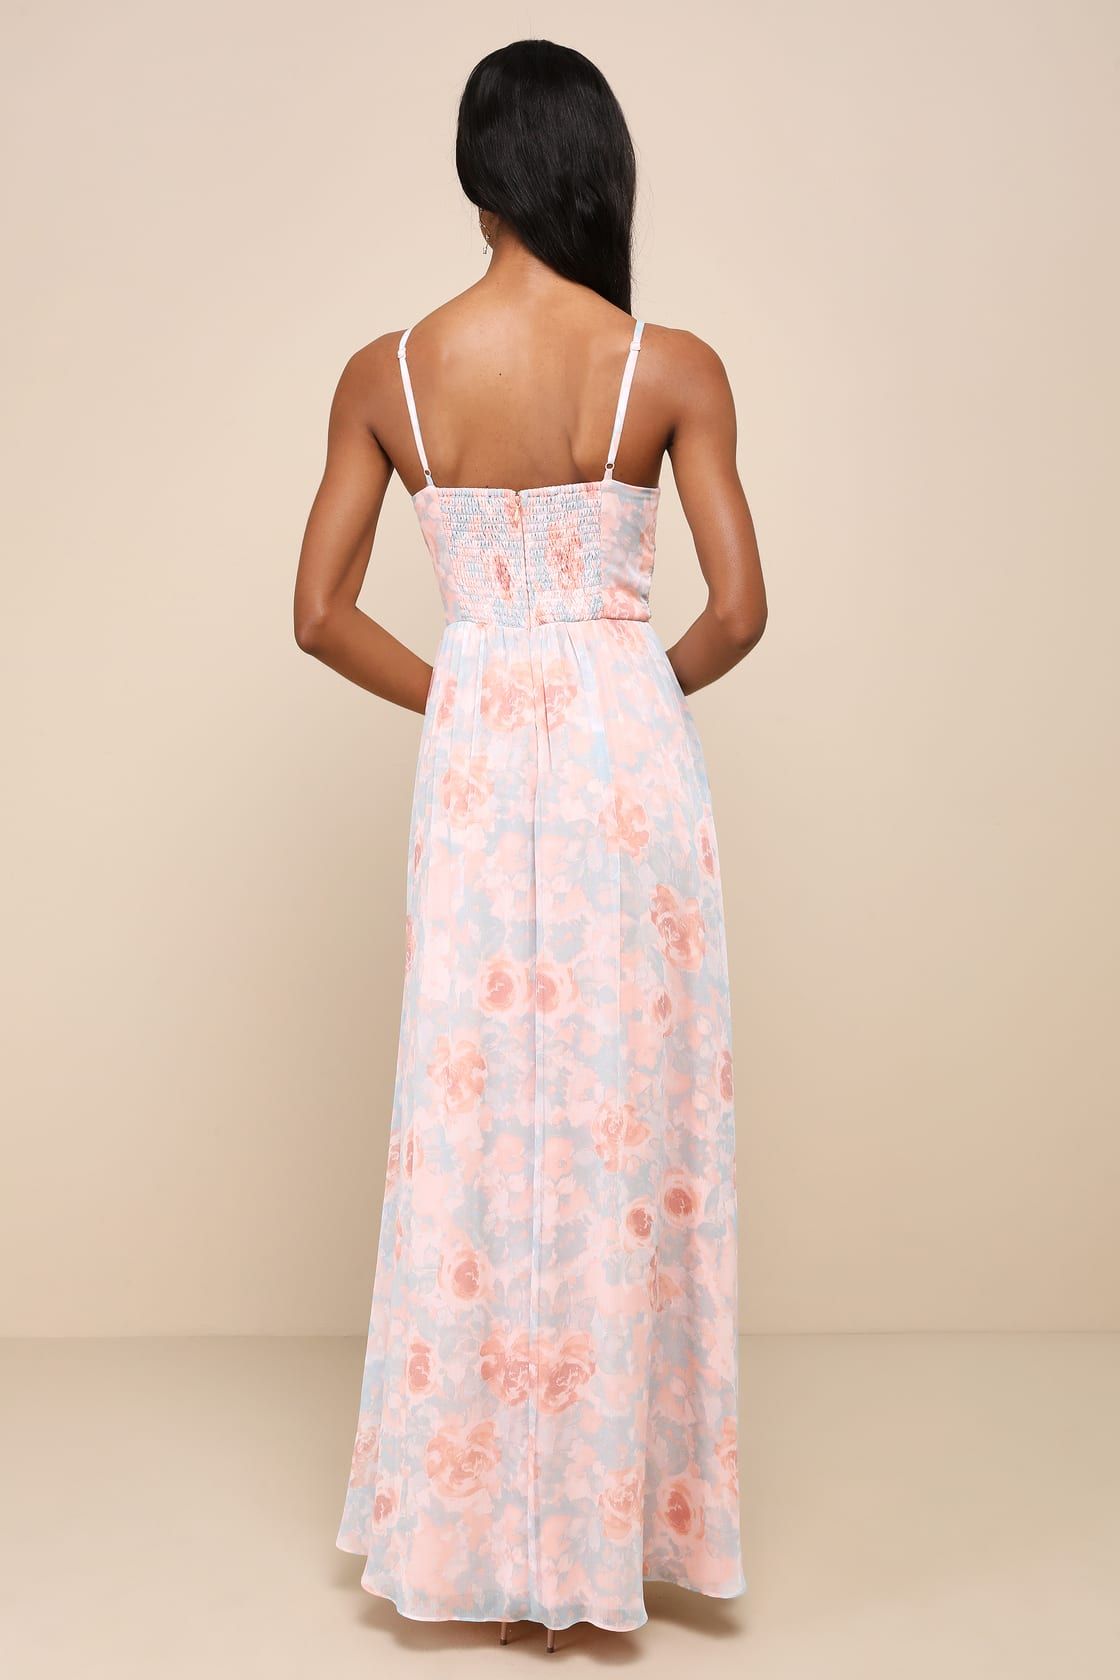 Exceptional Sweetness Peach Floral Chiffon Pleated Maxi Dress | Lulus